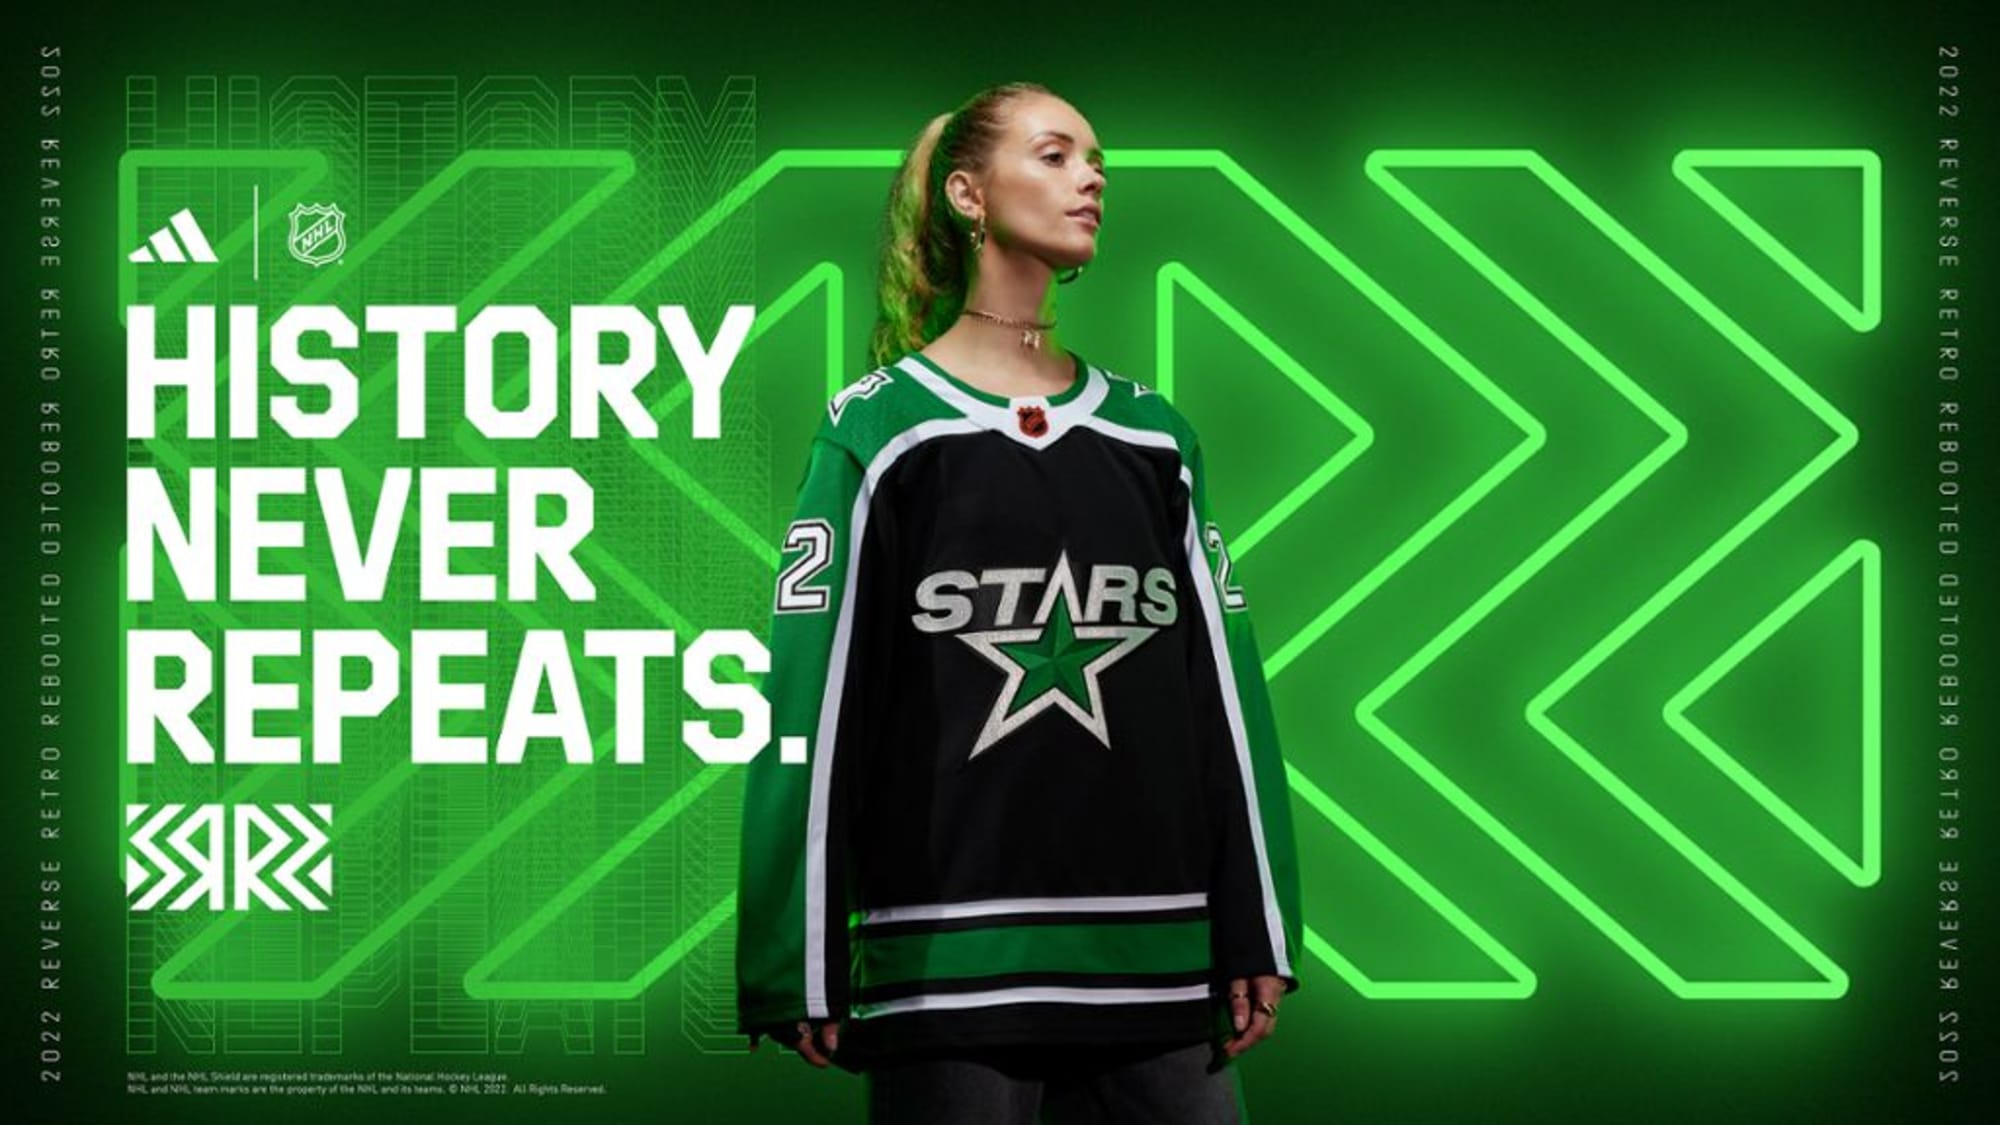 First Look at New 2022-23 NHL Reverse Retro Jersey Designs